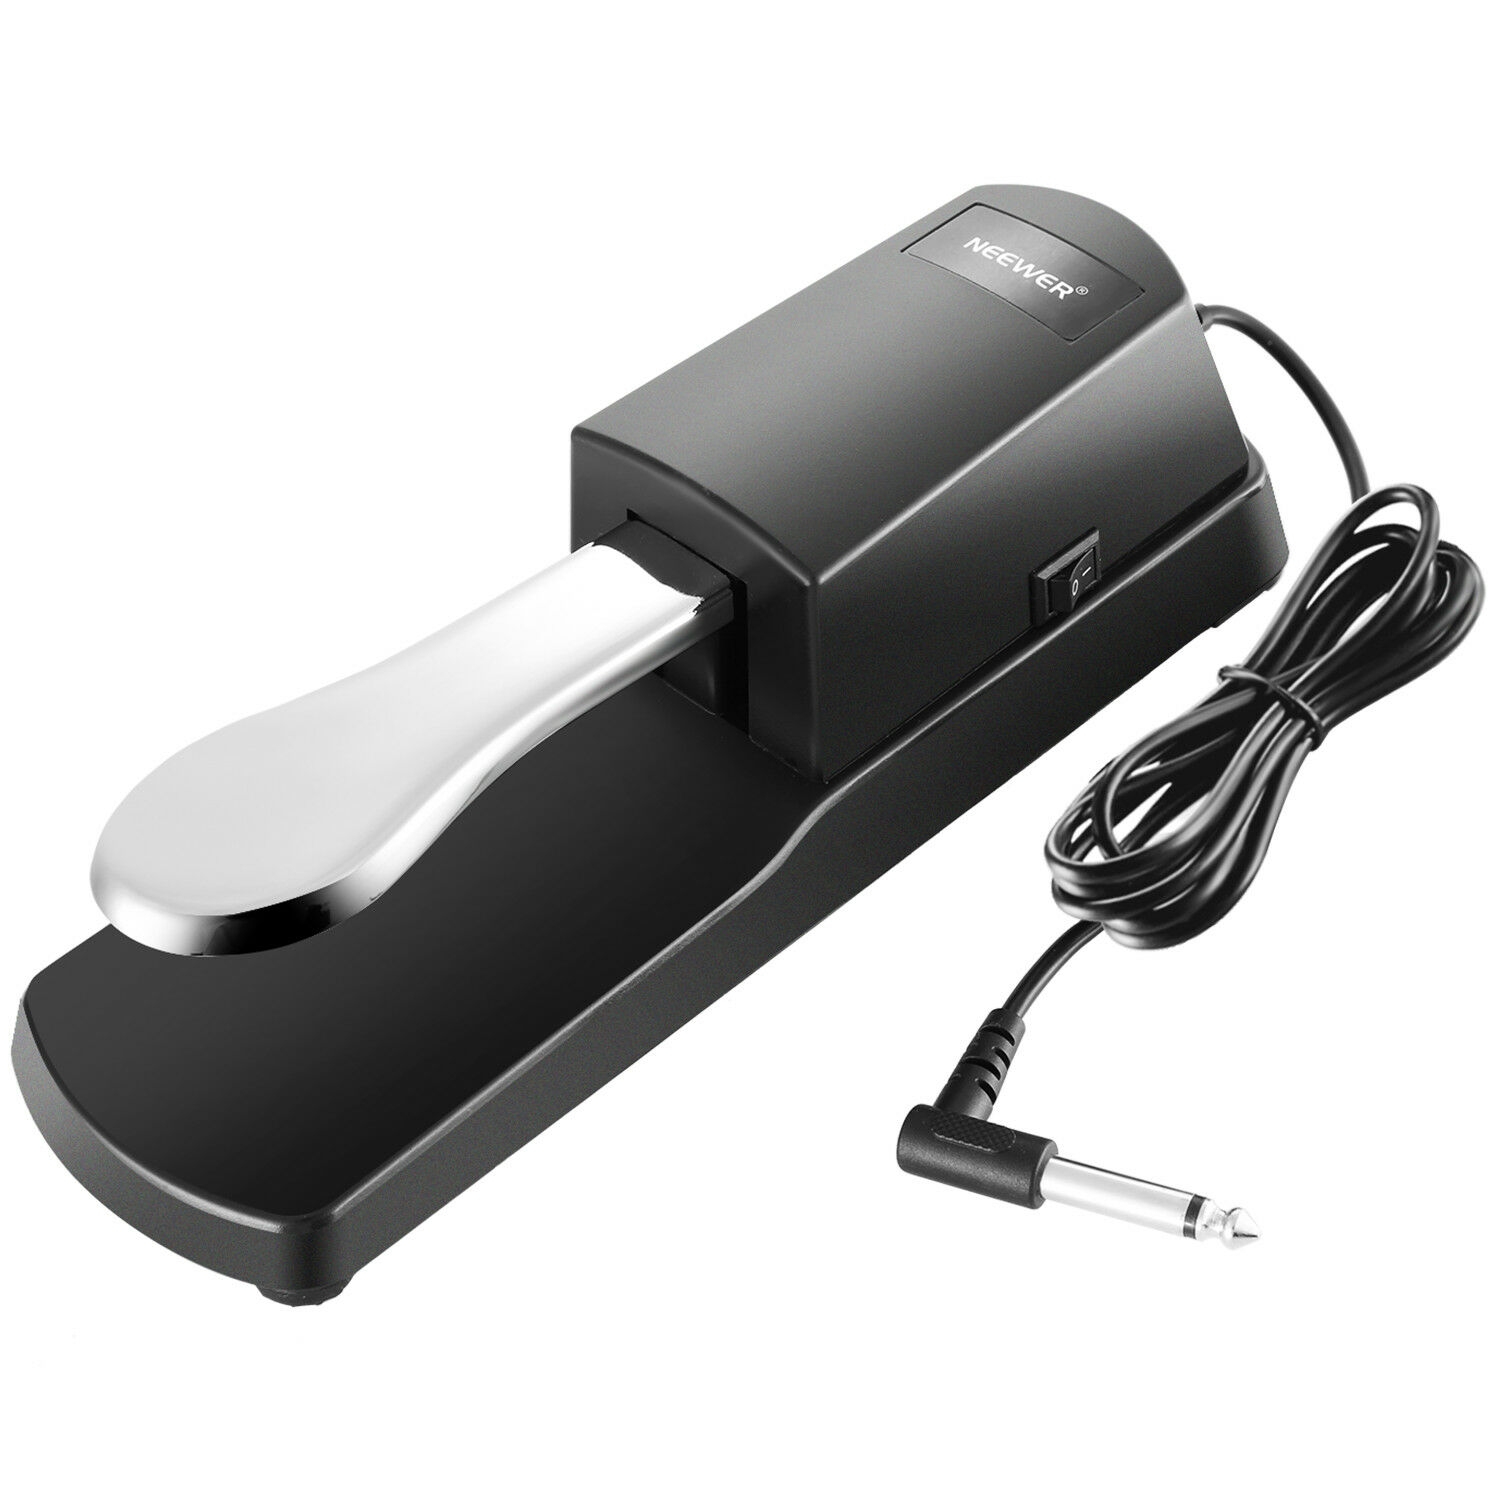 Neewer Universal Piano-style Sustain Foot Pedal With Polarity Switch Design Anti